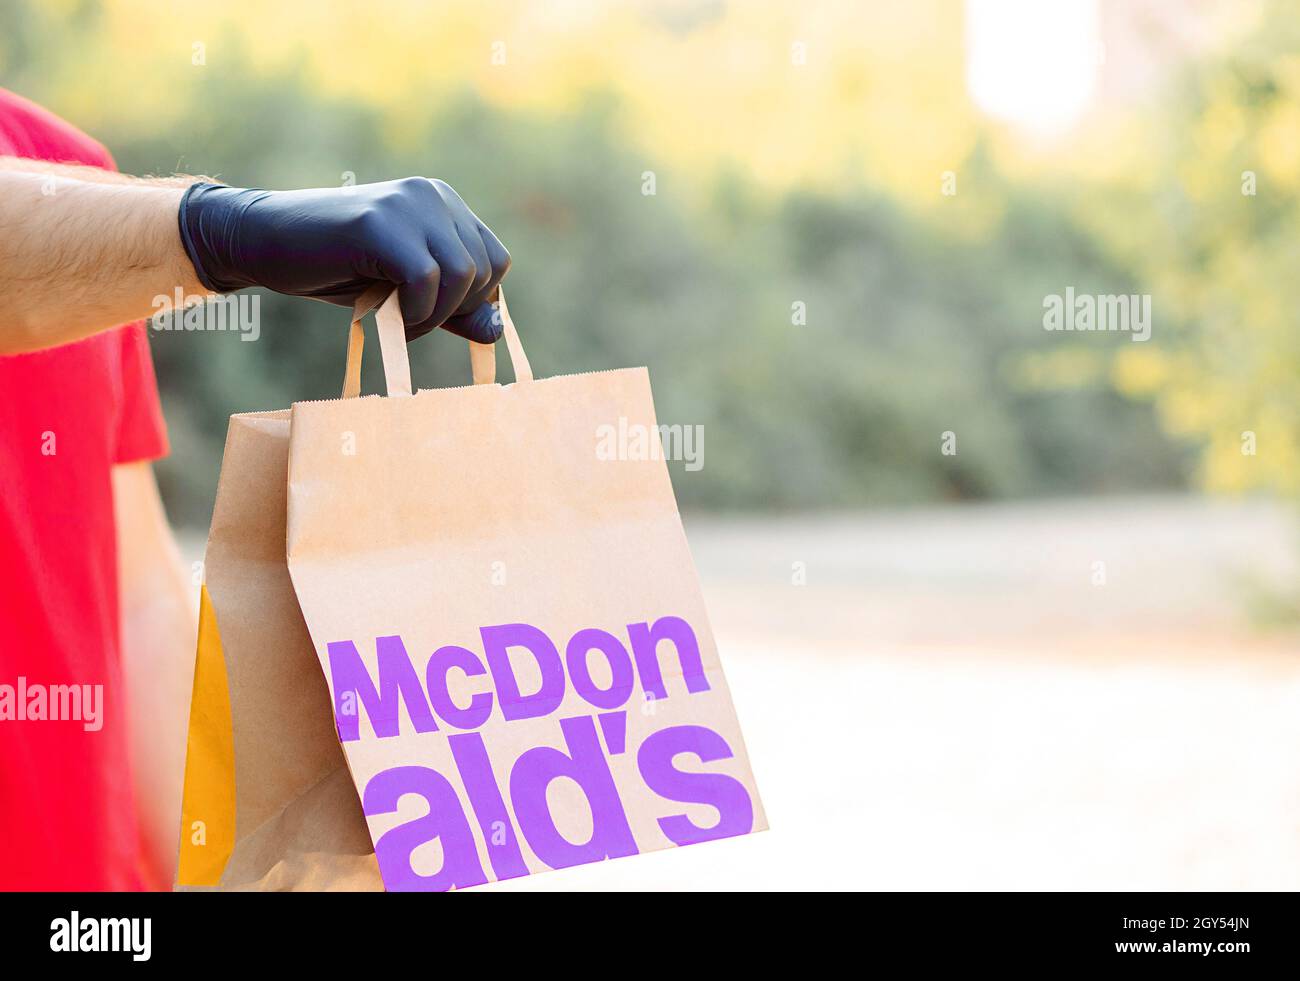 A men's hand in medical glove holds a paper bag Mcdonal's. Delivery McCafe. fast food restaurant Mcdonalds. Take away Mcdonal's Stock Photo